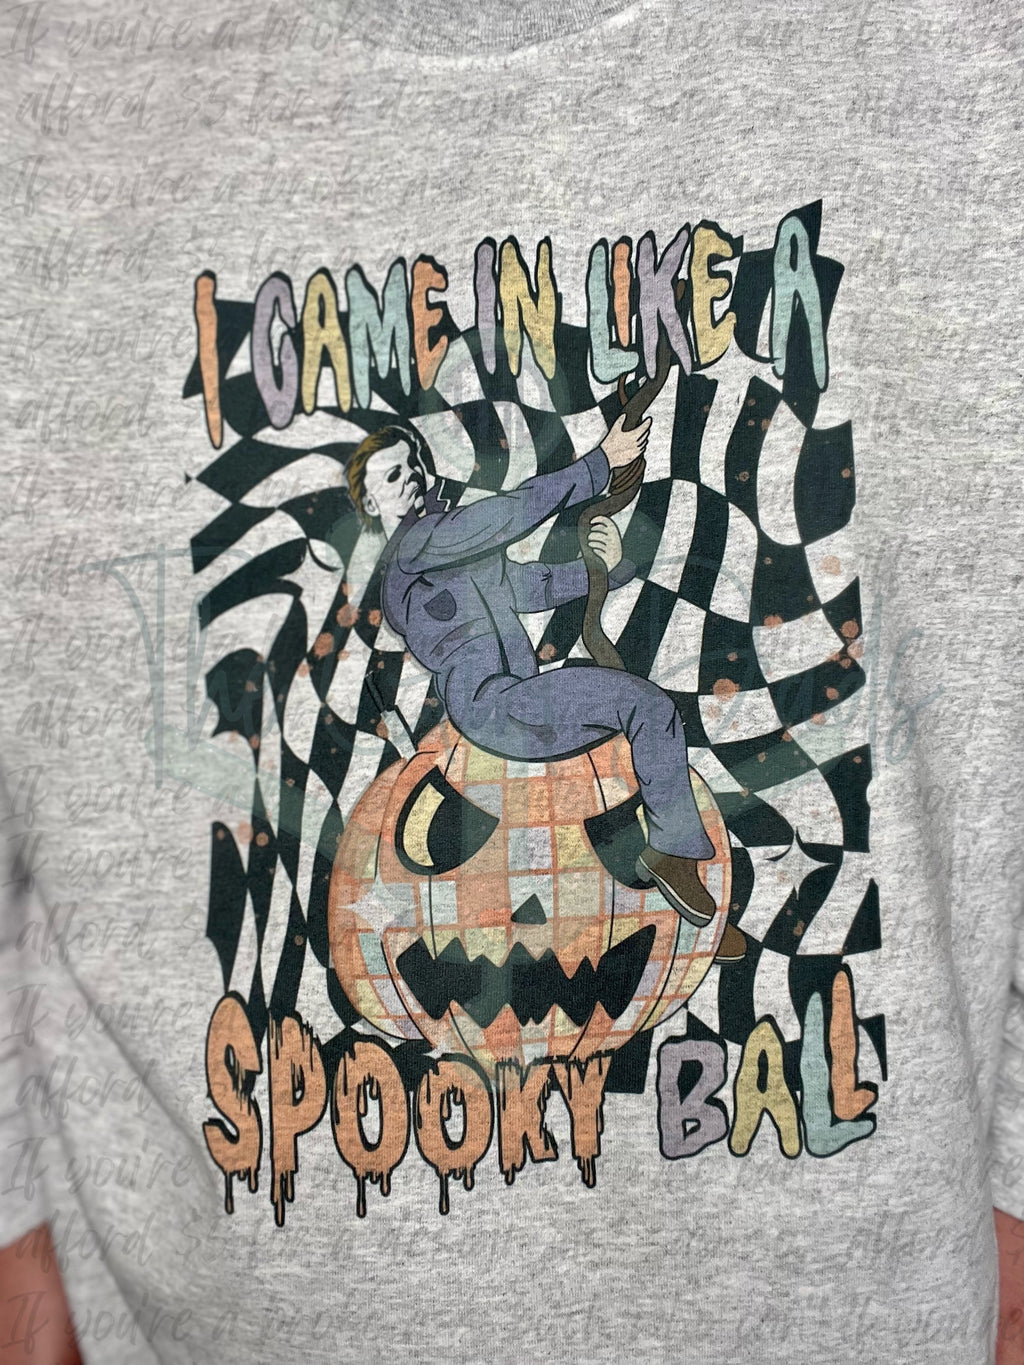 I Came In Like A Spooky Ball Top Design